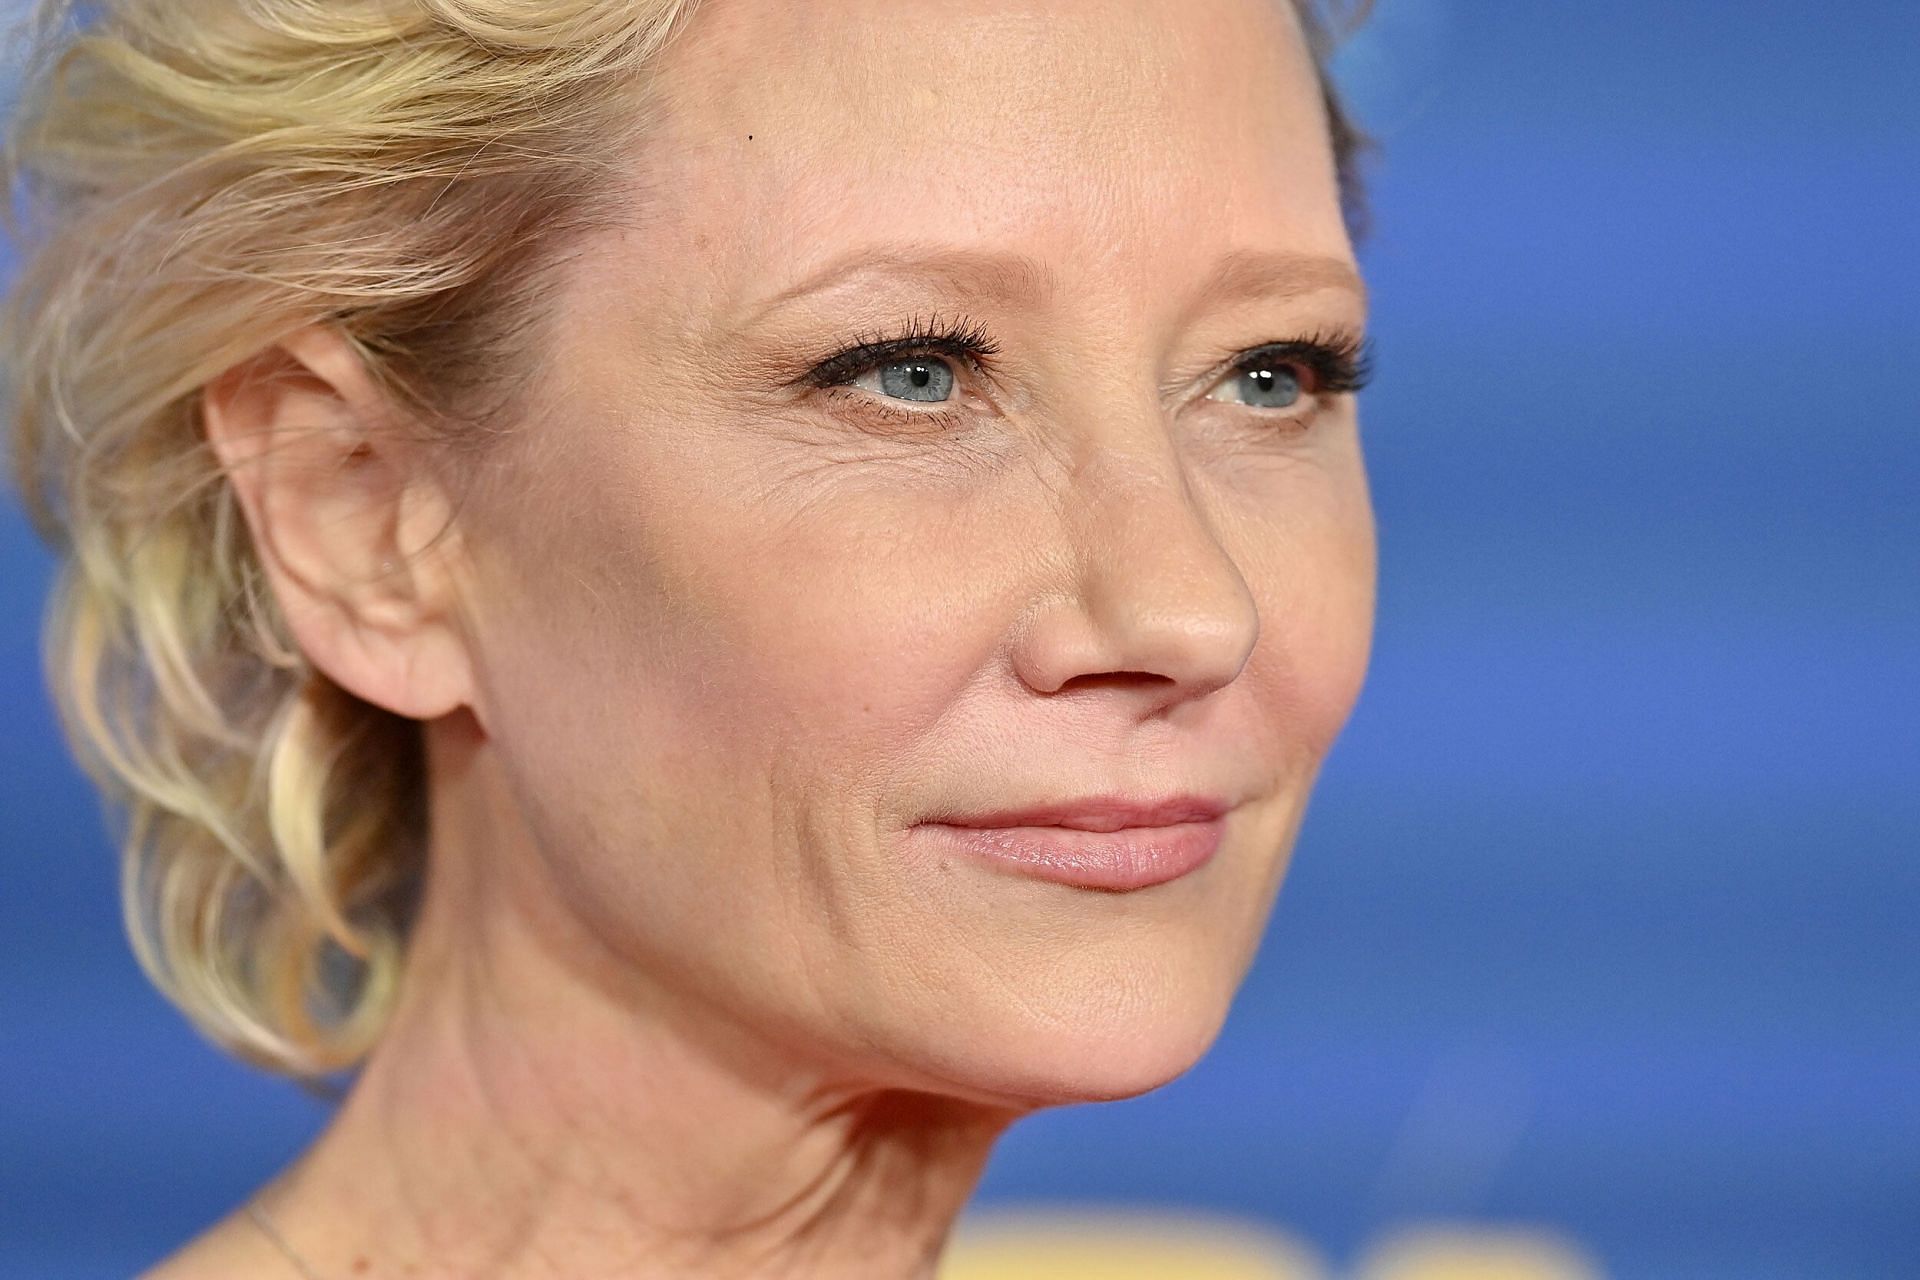 Anne Heche hospitalized after accident (Image via Axelle/Bauer-Griffin/FilmMagic/Getty Images)